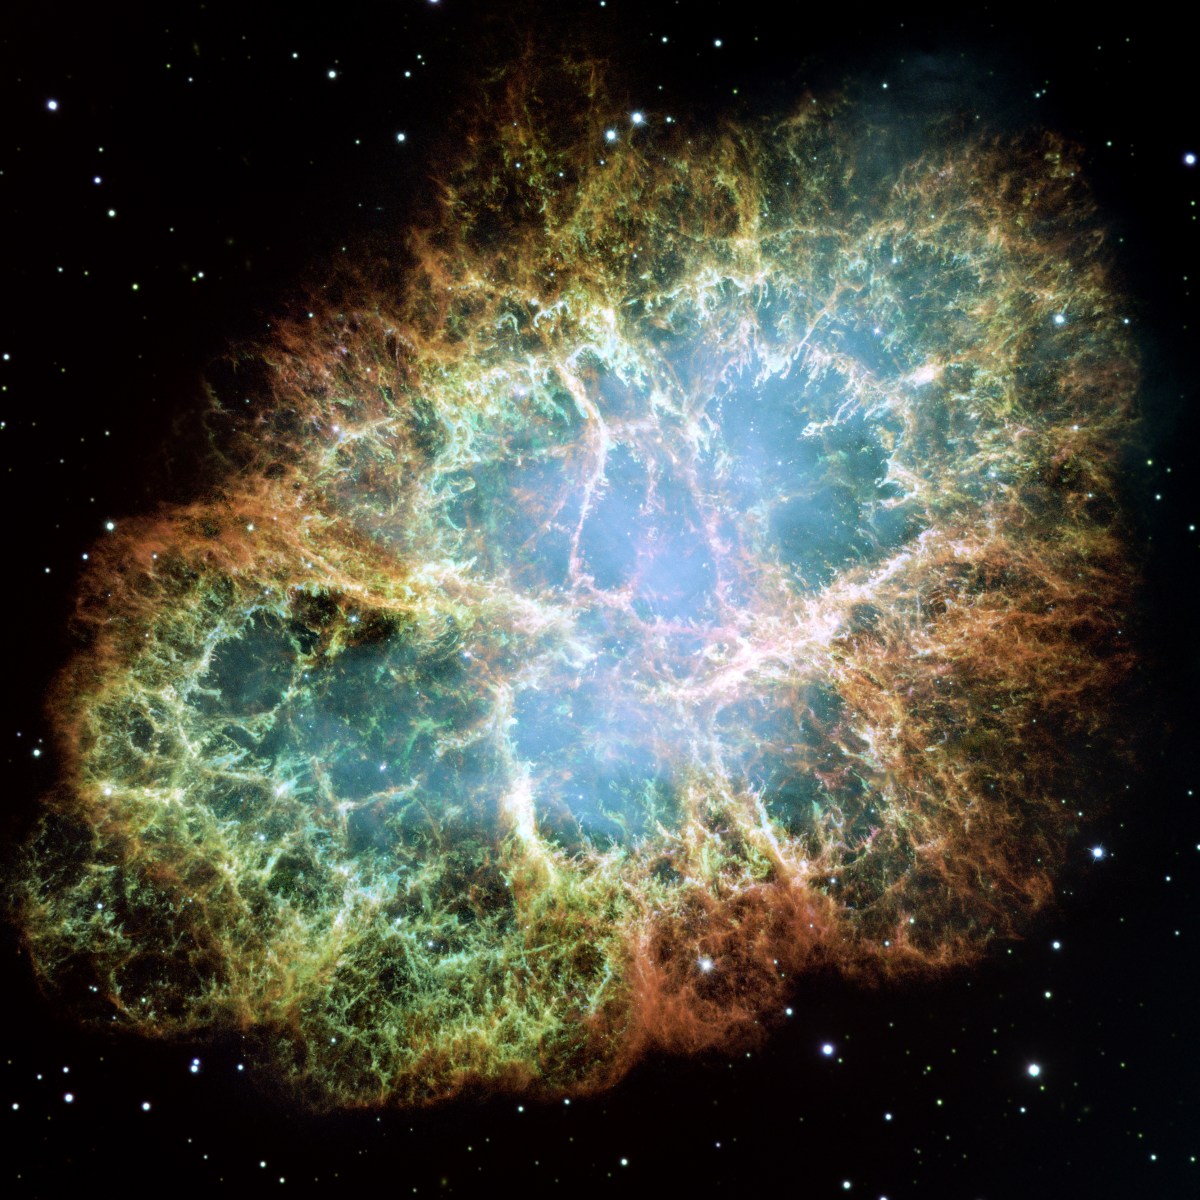 This Hubble image gives the most detailed view of the entire Crab Nebula ever. The Crab is among the most interesting and well studied objects in astronomy. This image is the largest image ever taken with Hubble's WFPC2 camera. It was assembled from 24 individual exposures taken with the NASA/ESA Hubble Space Telescope and is the highest resolution image of the entire Crab Nebula ever made.